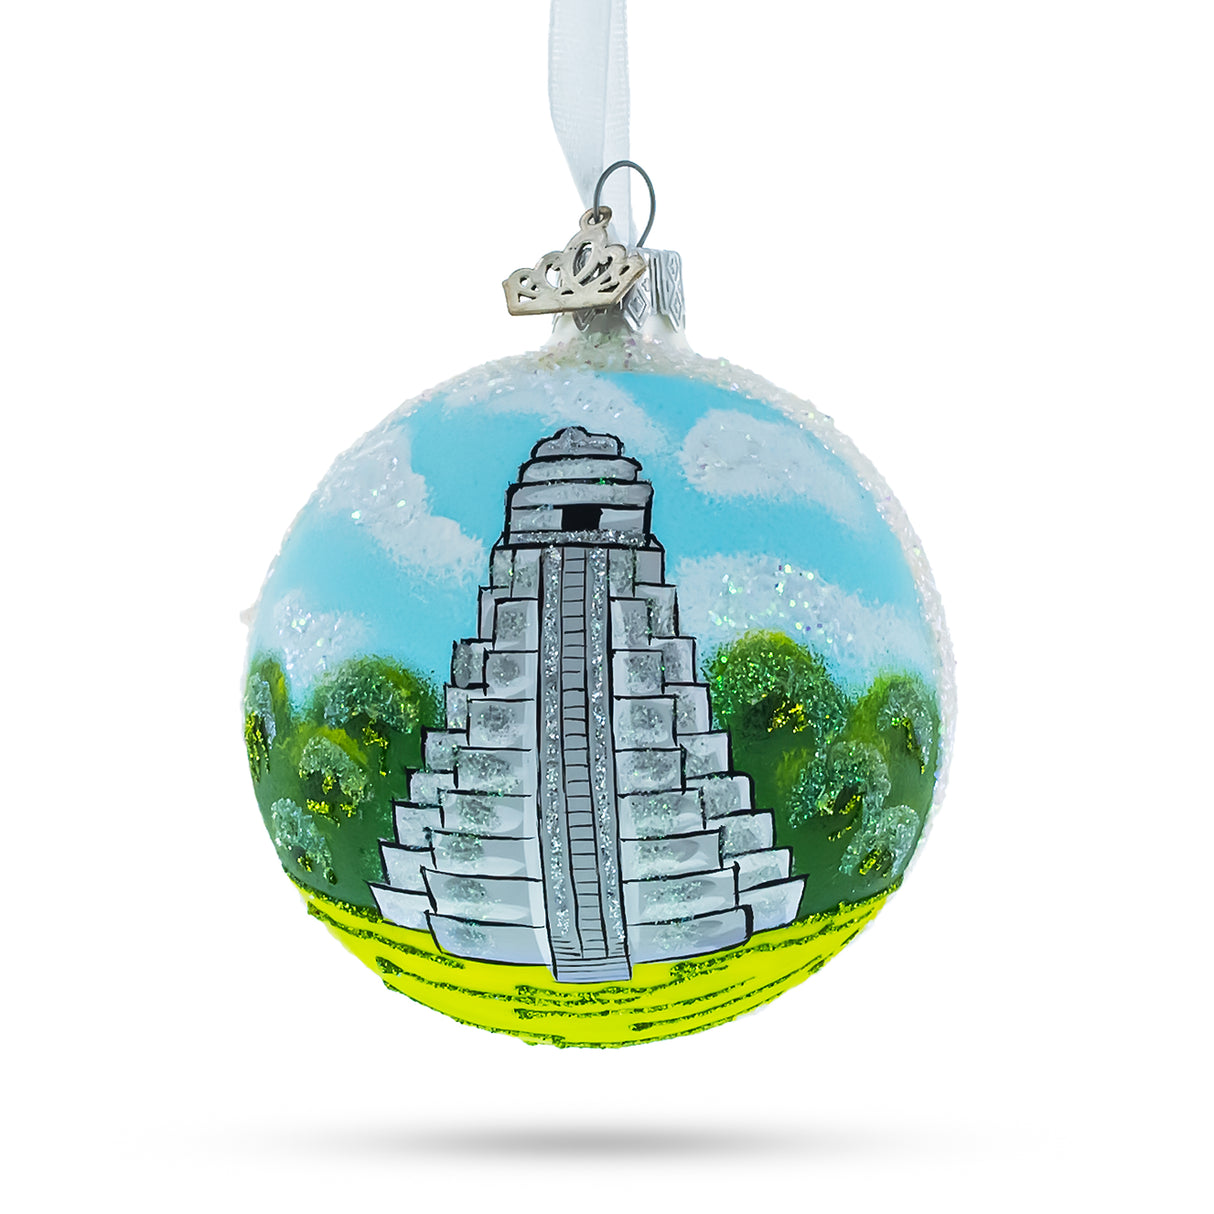 Tikal, Guatemala Glass Ball Christmas Ornament 3.25 Inches in Multi color, Round shape